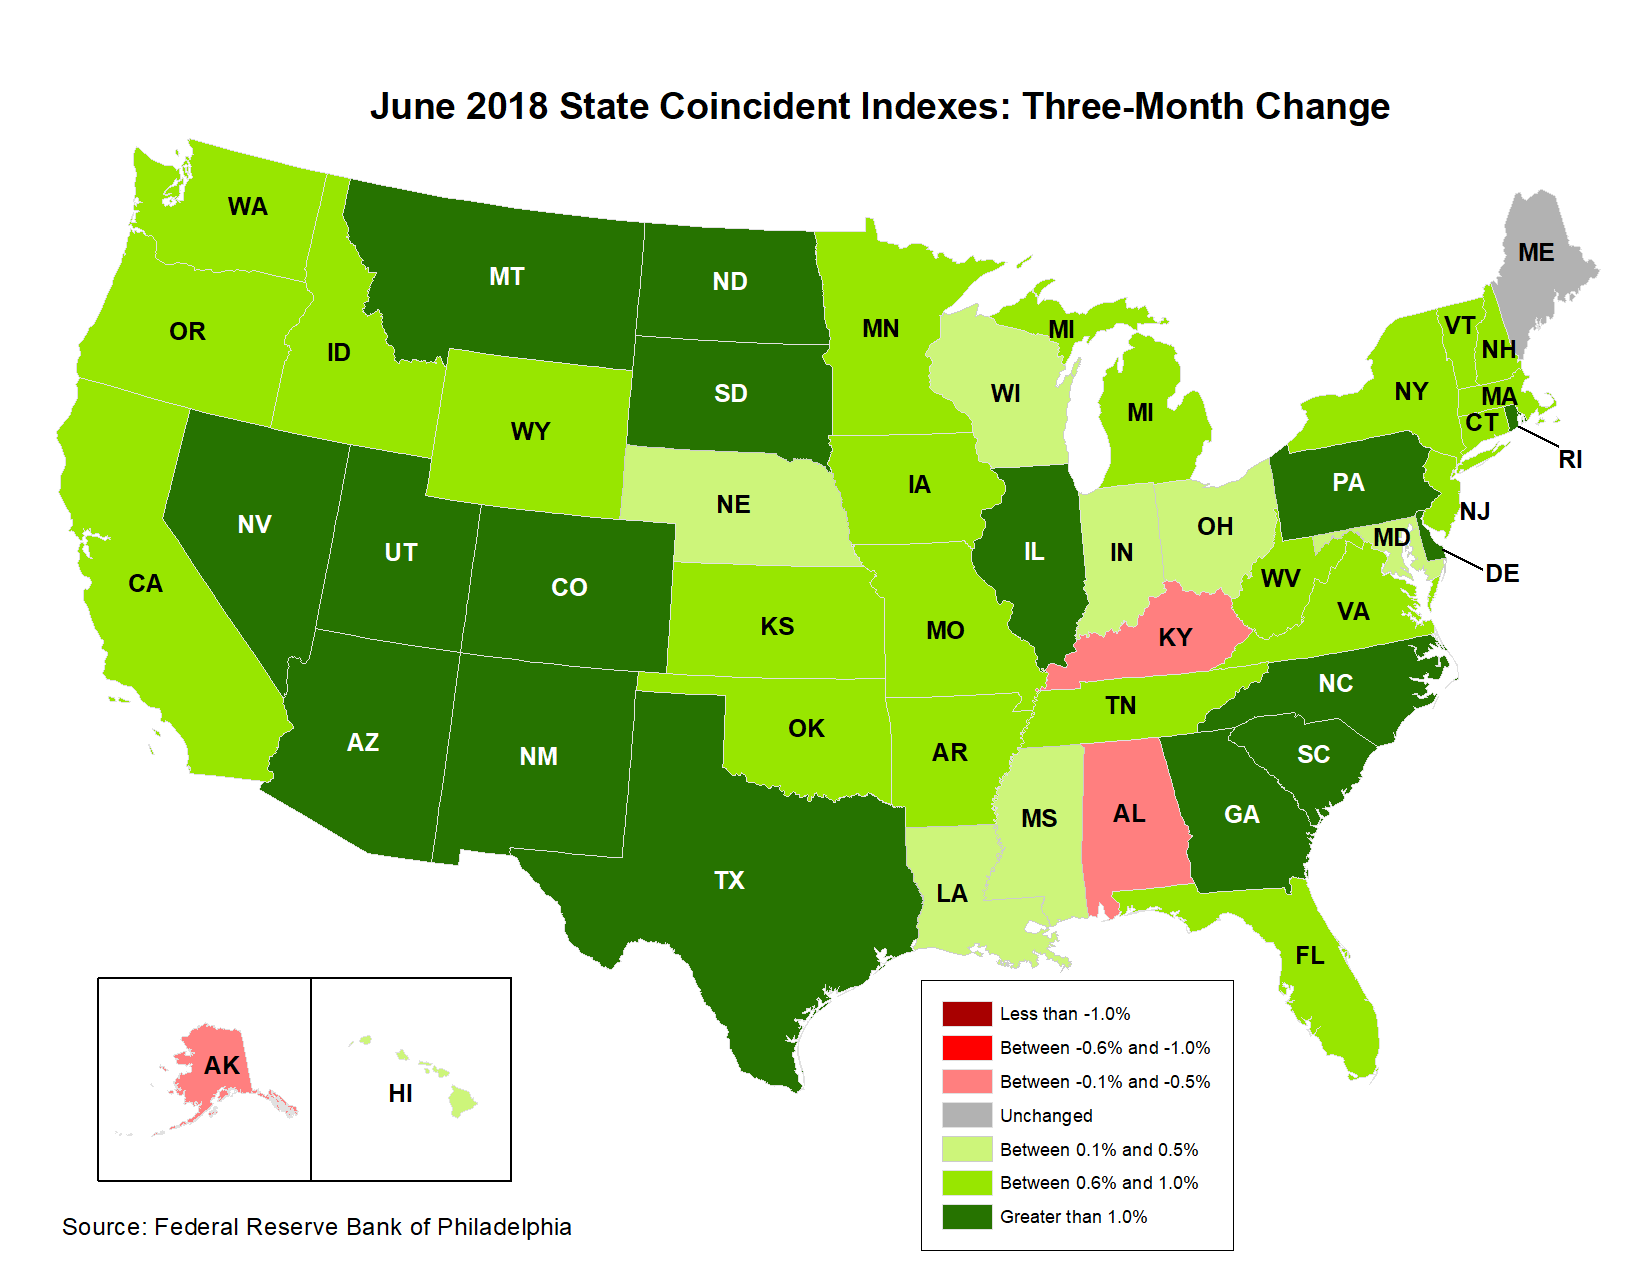 Map of the U.S. showing the State Coincident Indexes Three-Month Change in June 2018